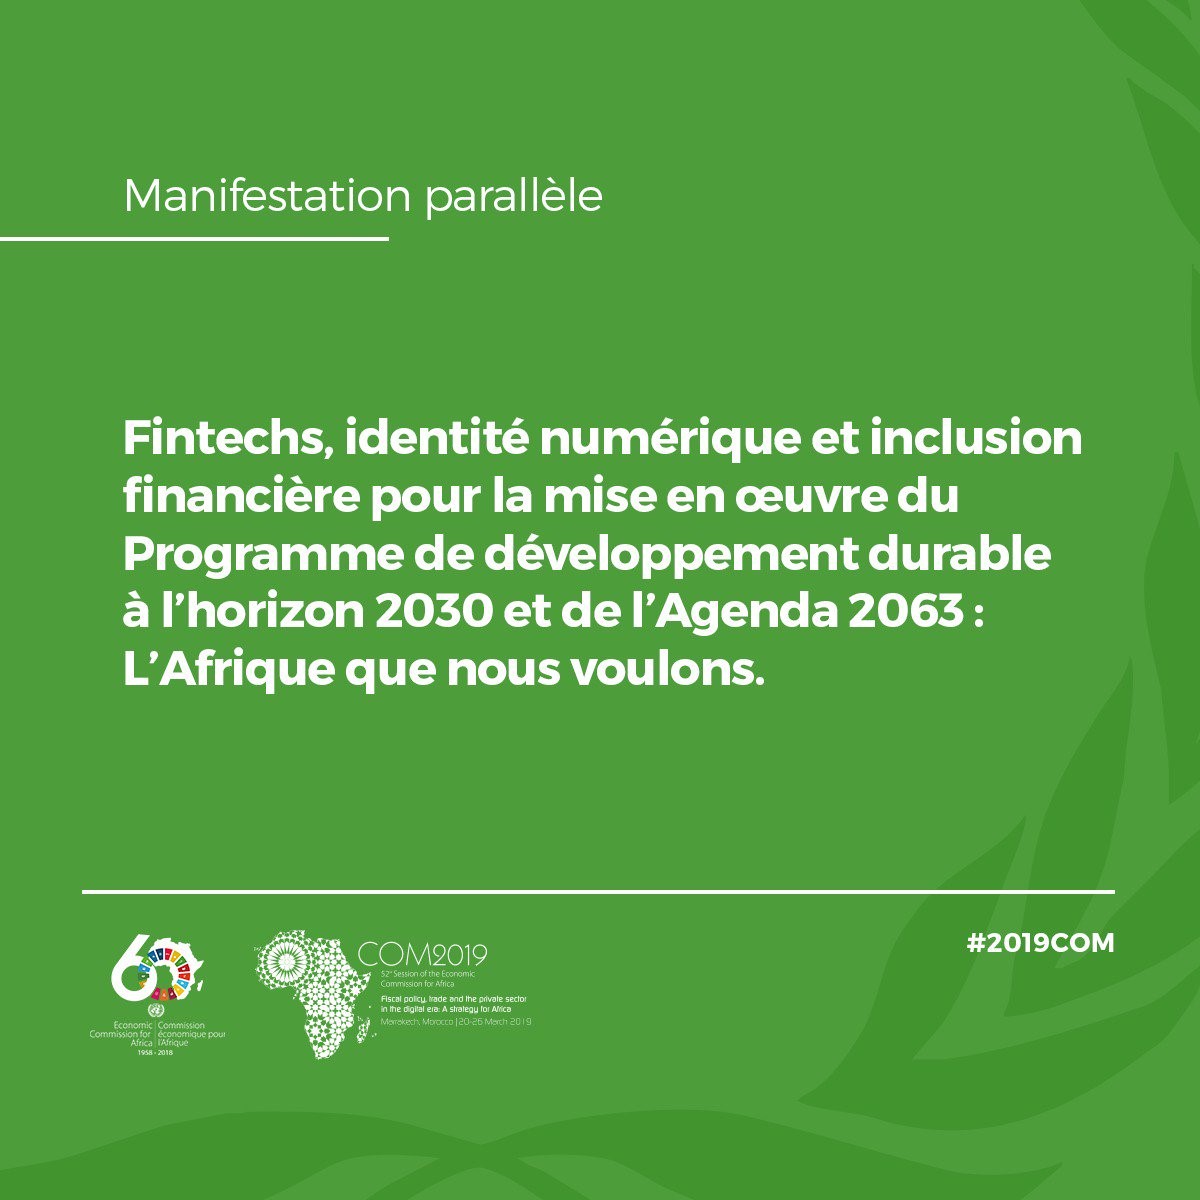 Participation in the Side Event on "Fintechs, Digital Identification and Financial Inclusion for the implementation of the Agenda 2030 for Sustainable Development and Agenda 2063 : The Africa We Want"